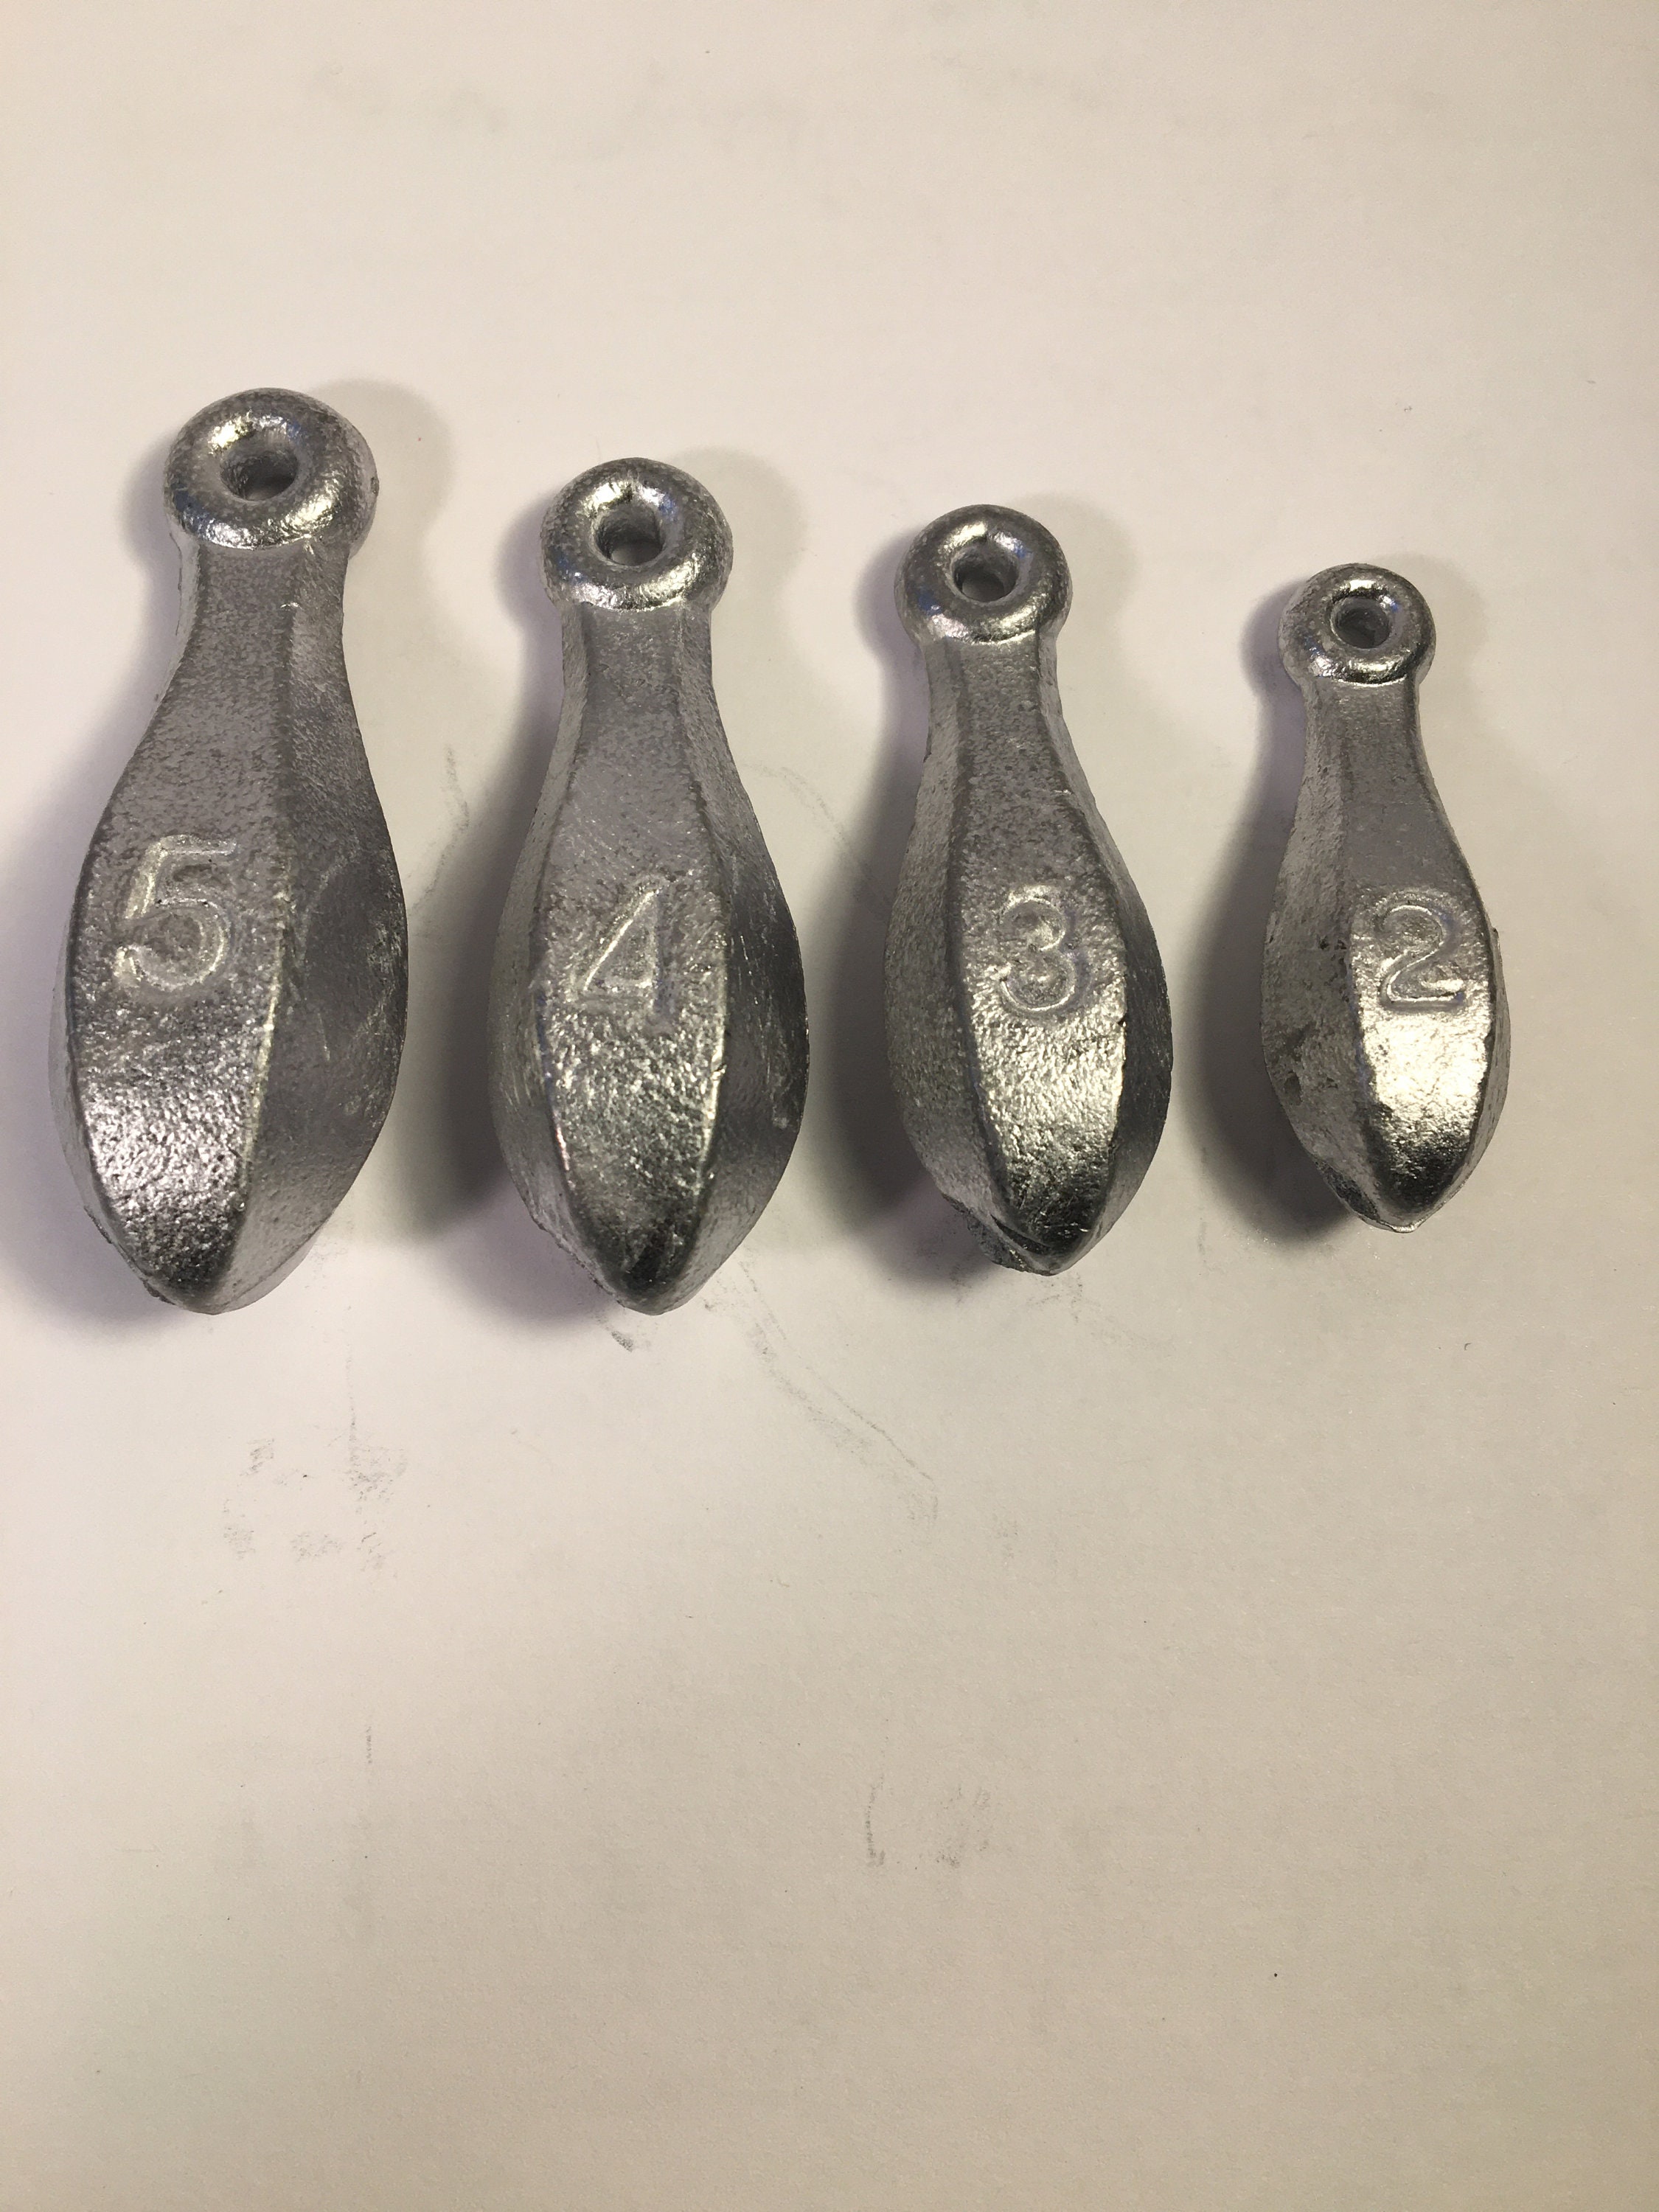 Bullet Weights Egg Sinkers 6 oz, 3PC